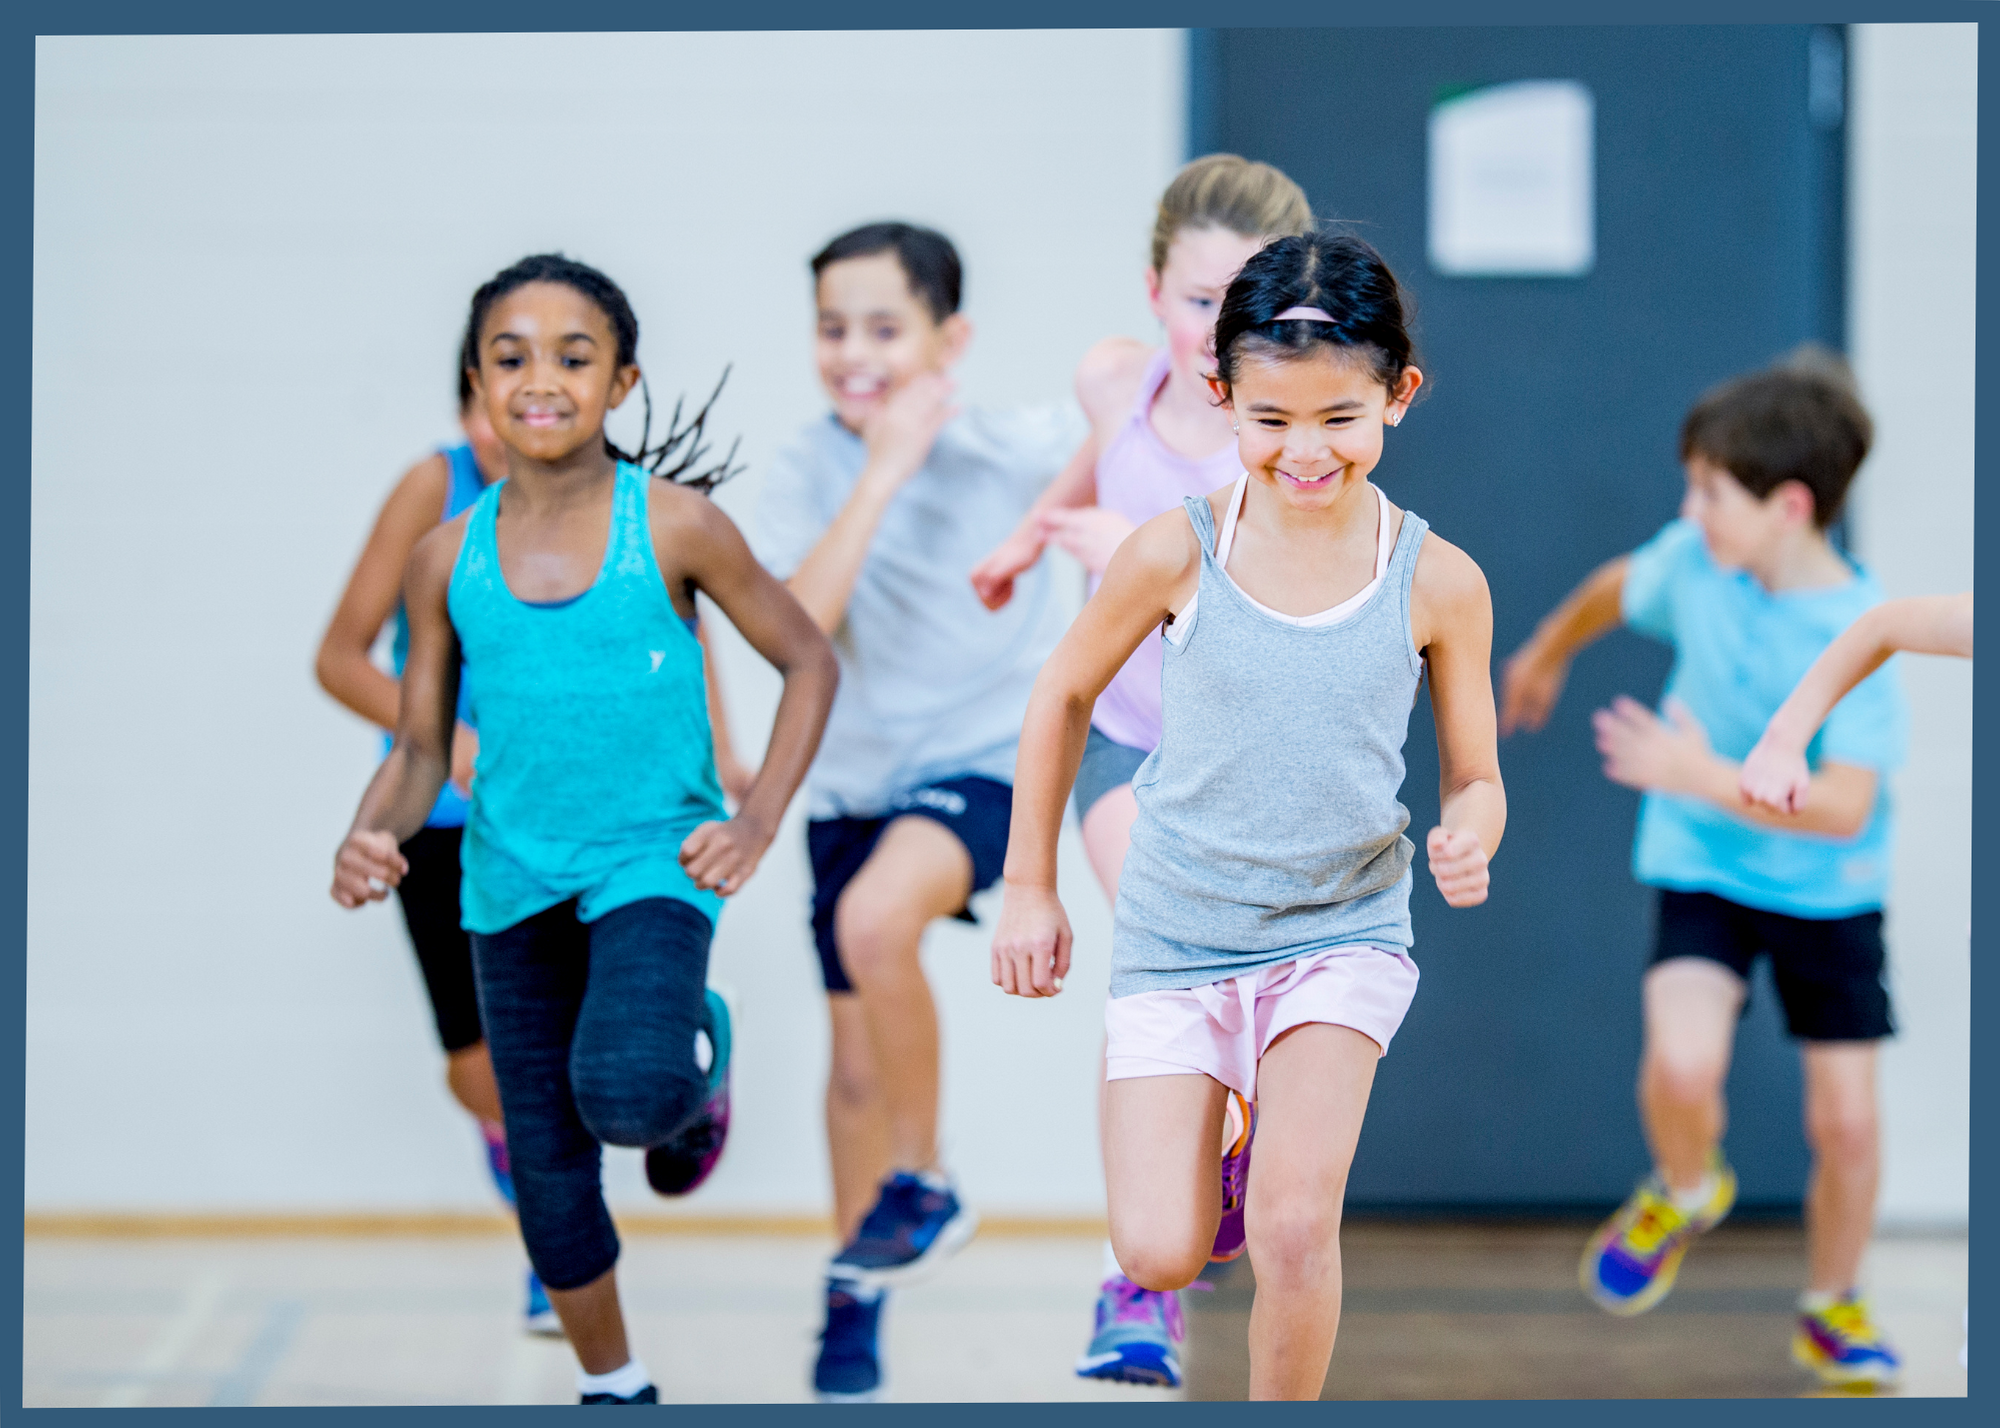 17 Awesome TAG Games You Should be Playing in P.E. Class